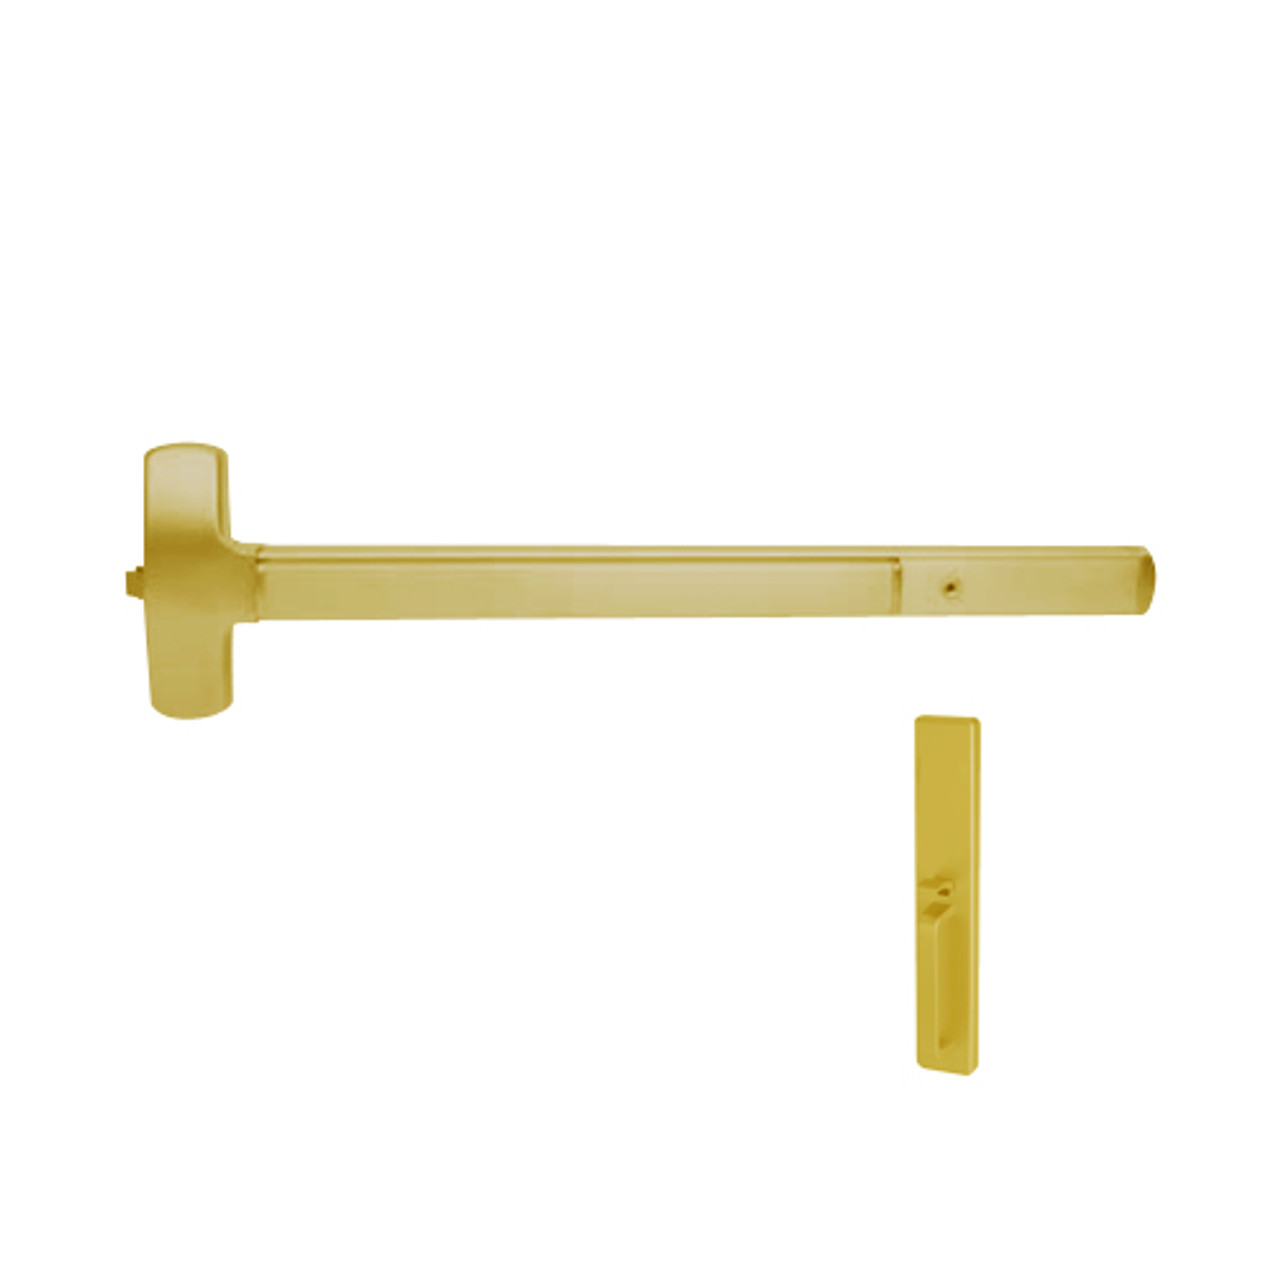 25-R-TP-BE-US3-3 Falcon Exit Device in Polished Brass